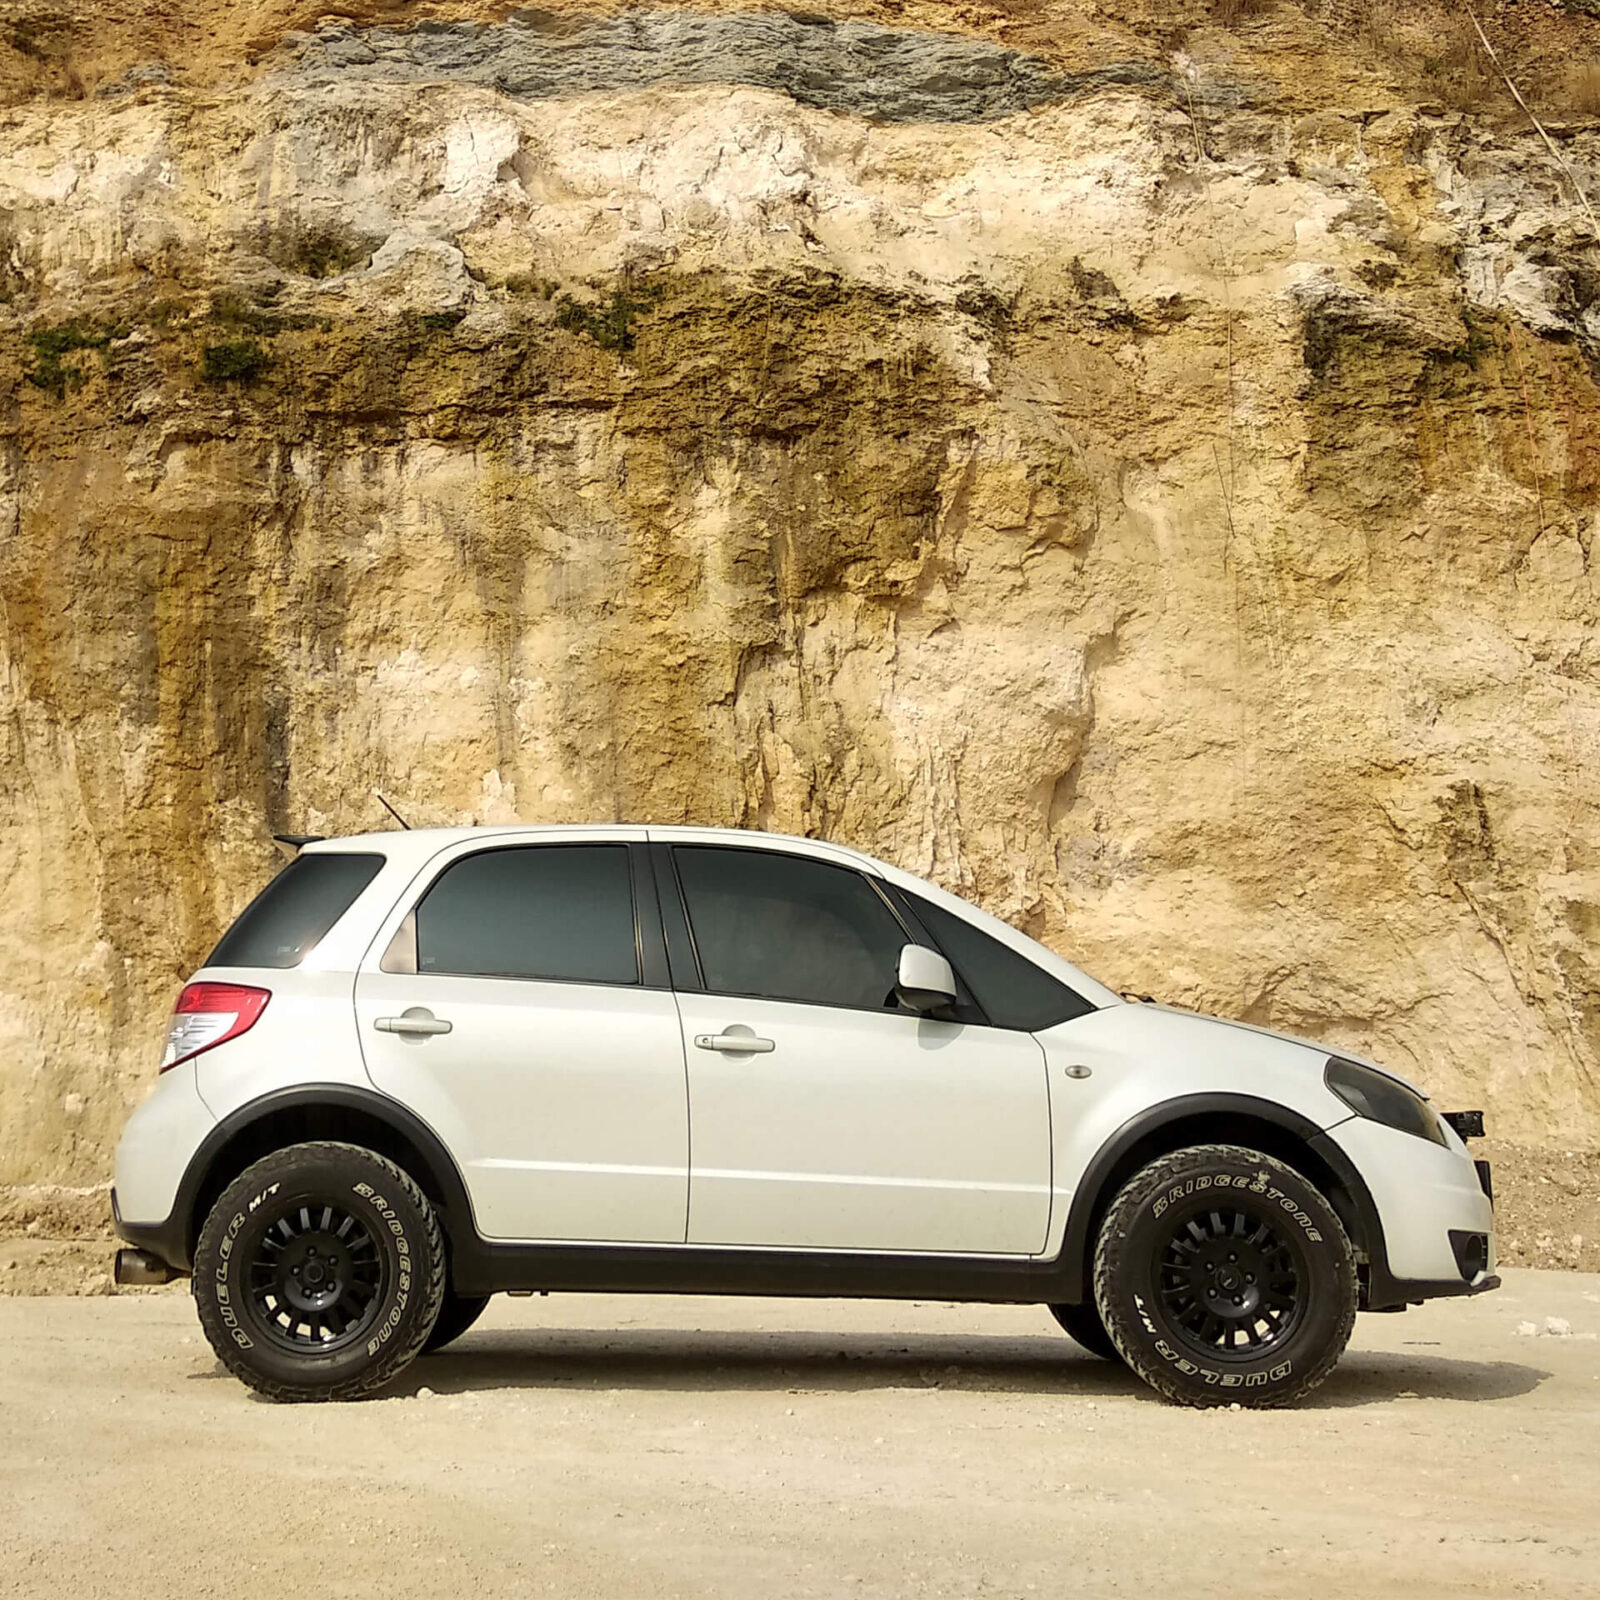 Lifted Suzuki SX4 With off-road wheels